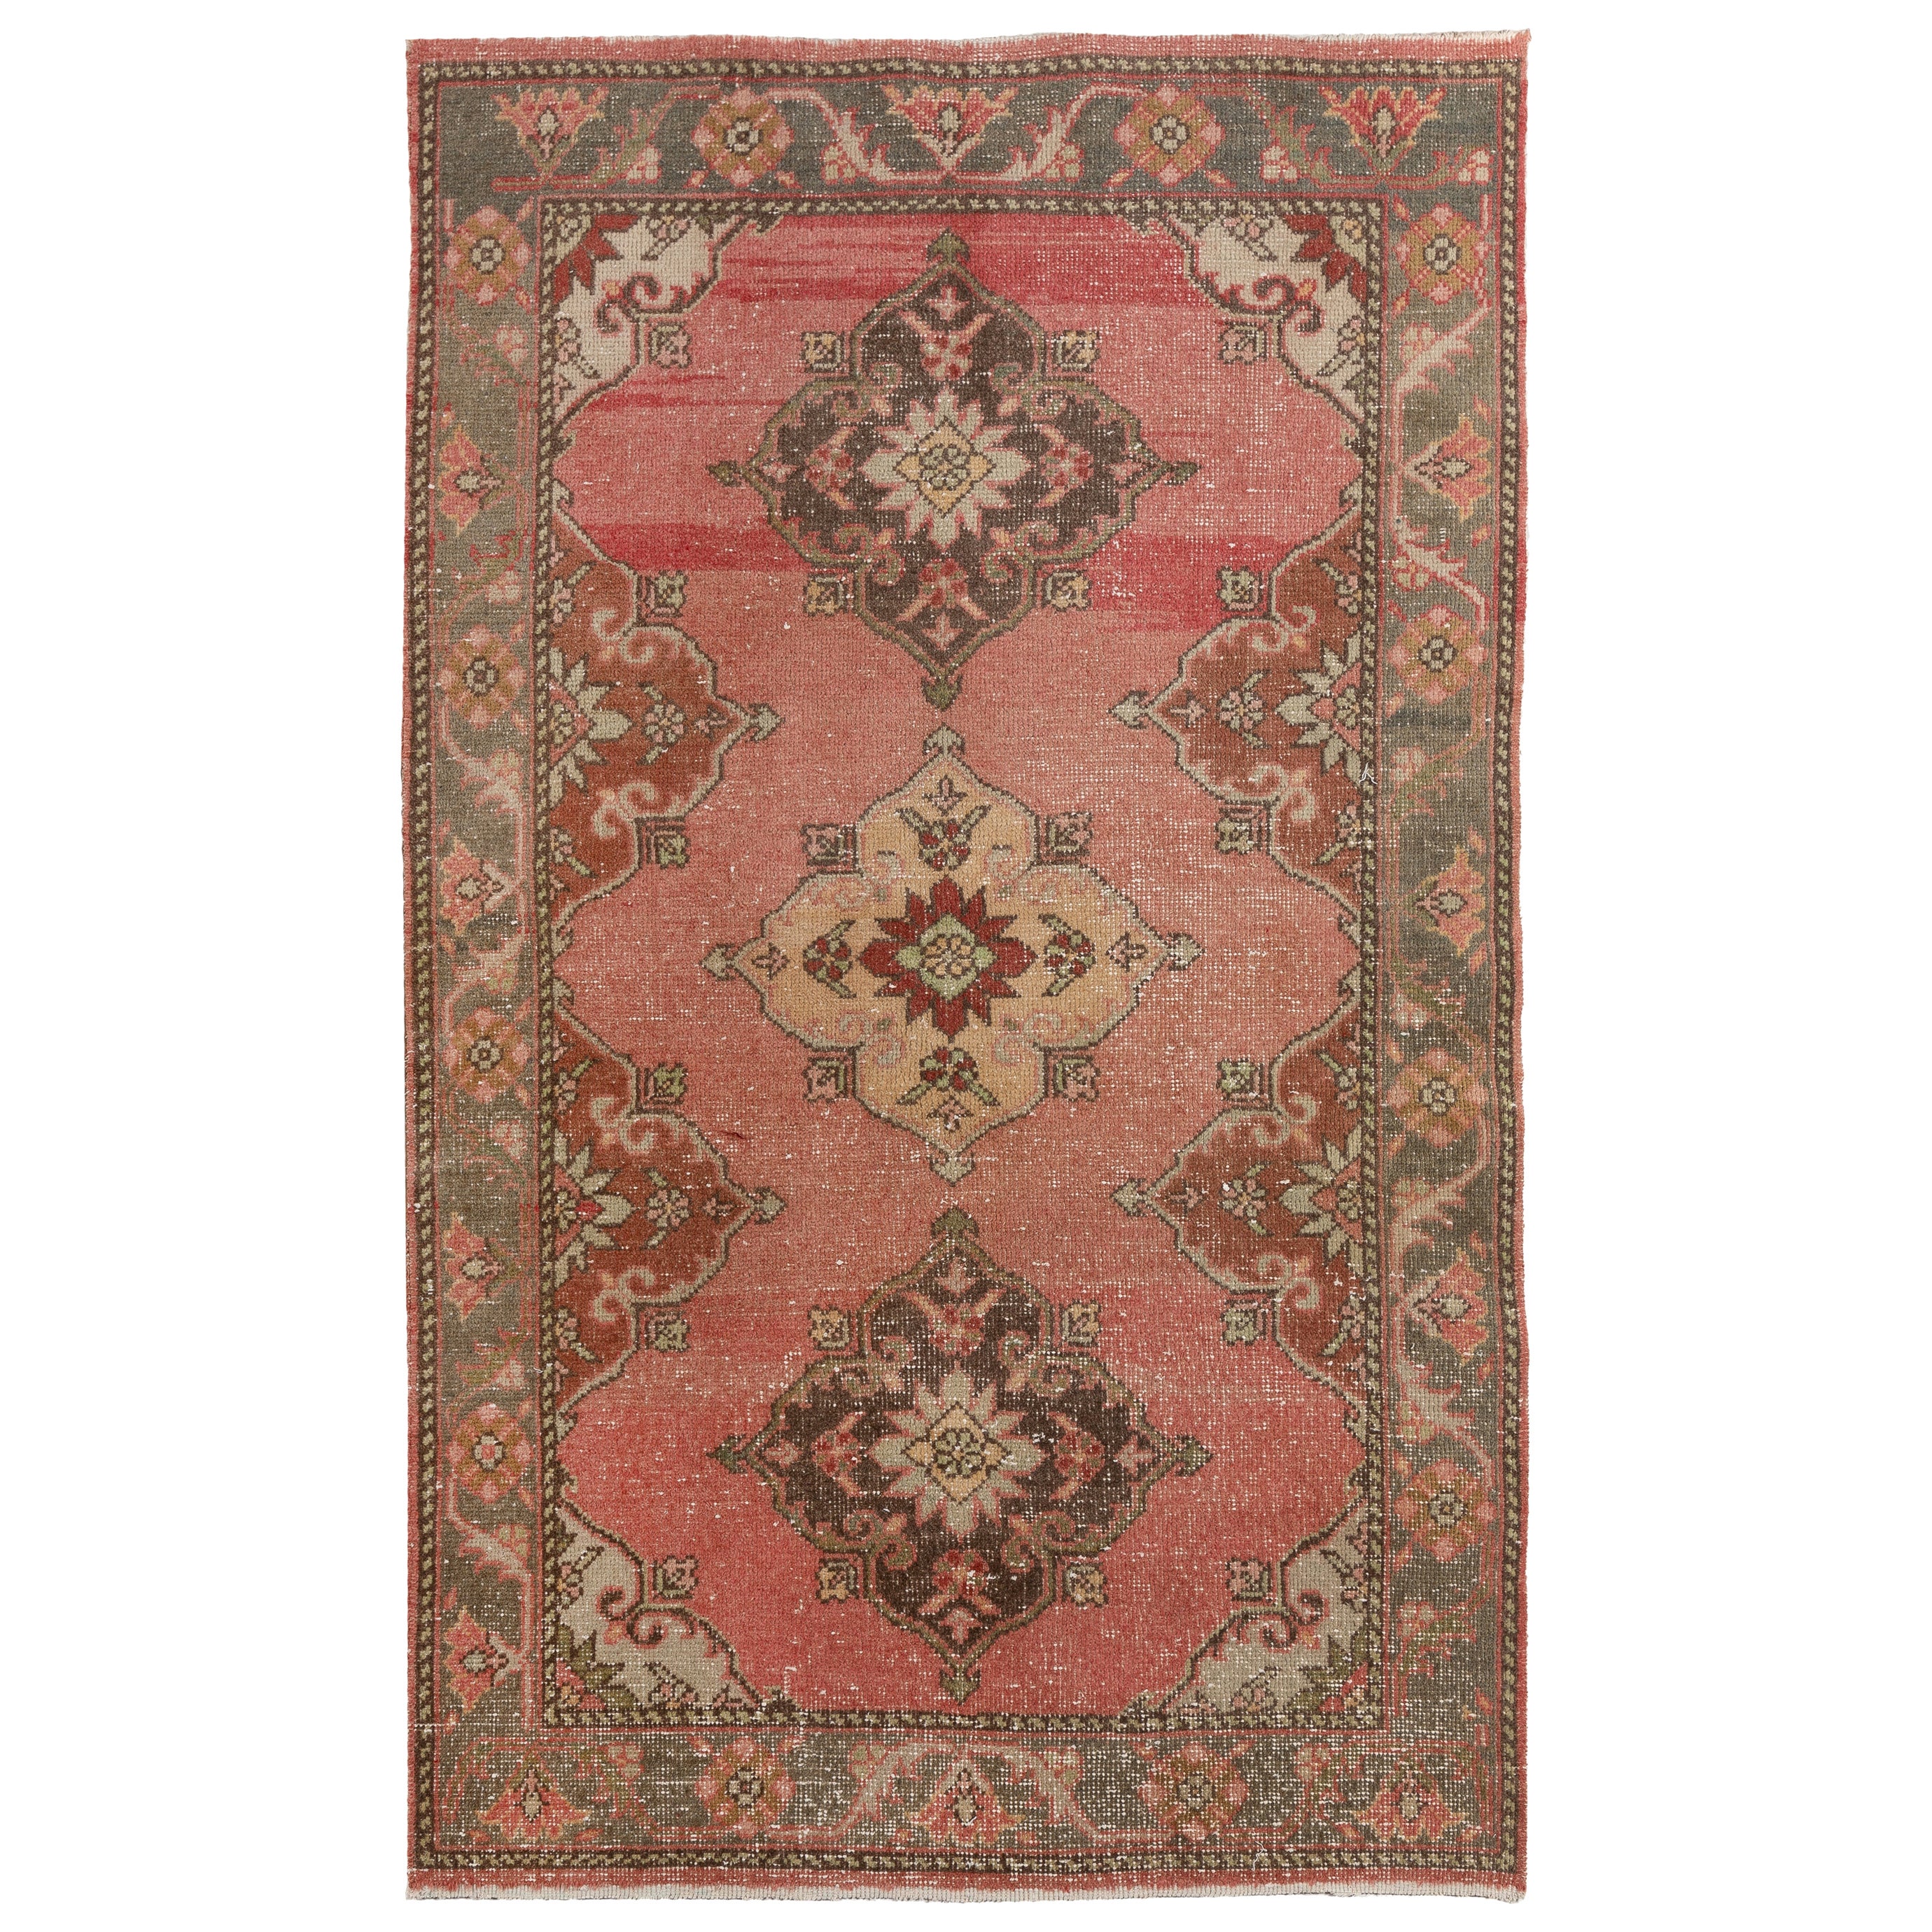 3.4x5.7 Ft Traditional Hand Made Vintage Oushak Wool Rug, Soft Earthy Colors For Sale